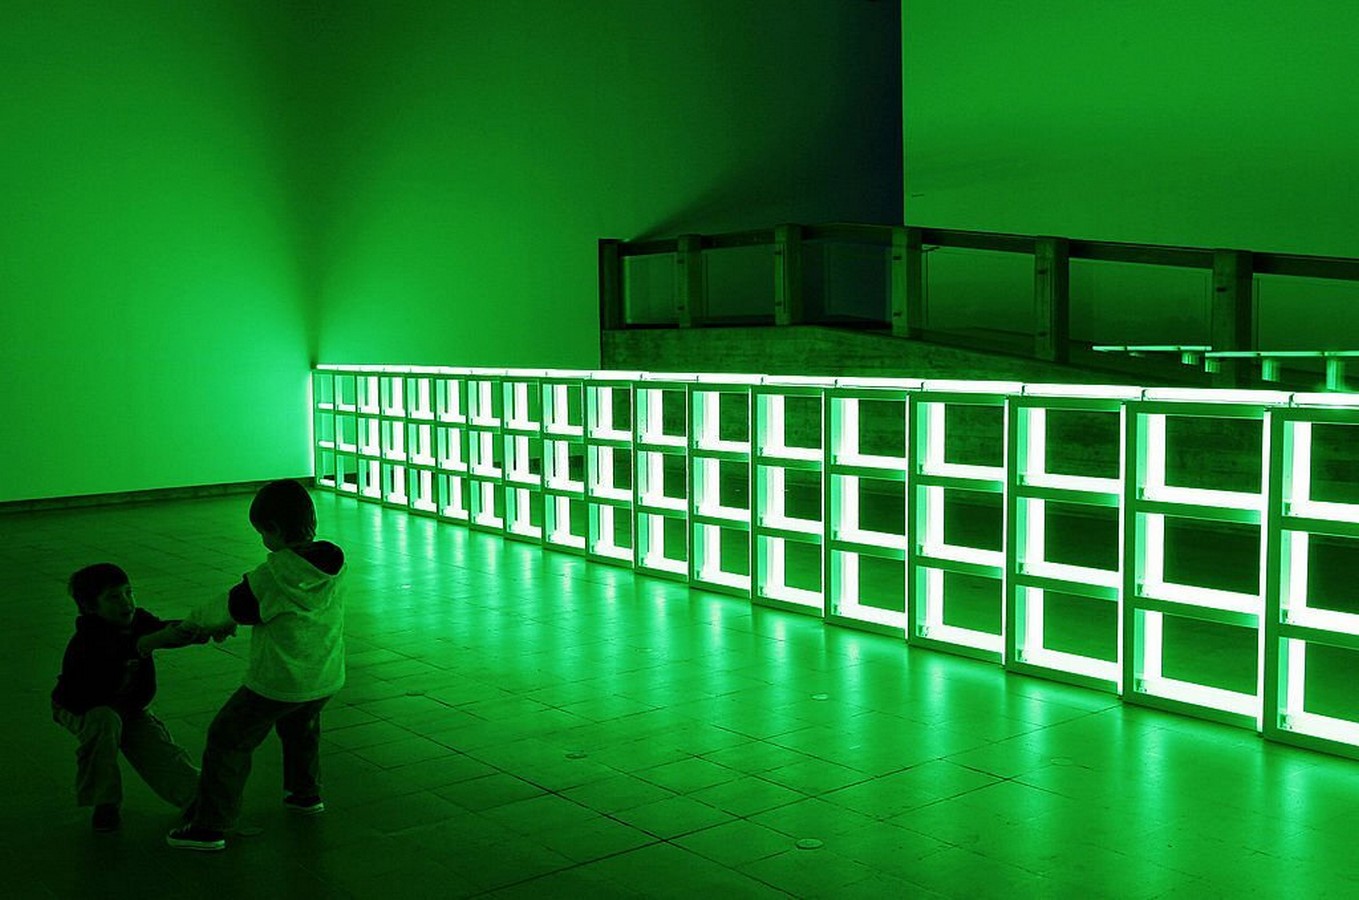 untitled (to you, Heiner, with admiration and affection)_https://www.gettyimages.in/photos/dan-flavin-?assettype=image&amp;family=editorial&amp;phrase=dan%20flavin%20&amp;sort=mostpopular